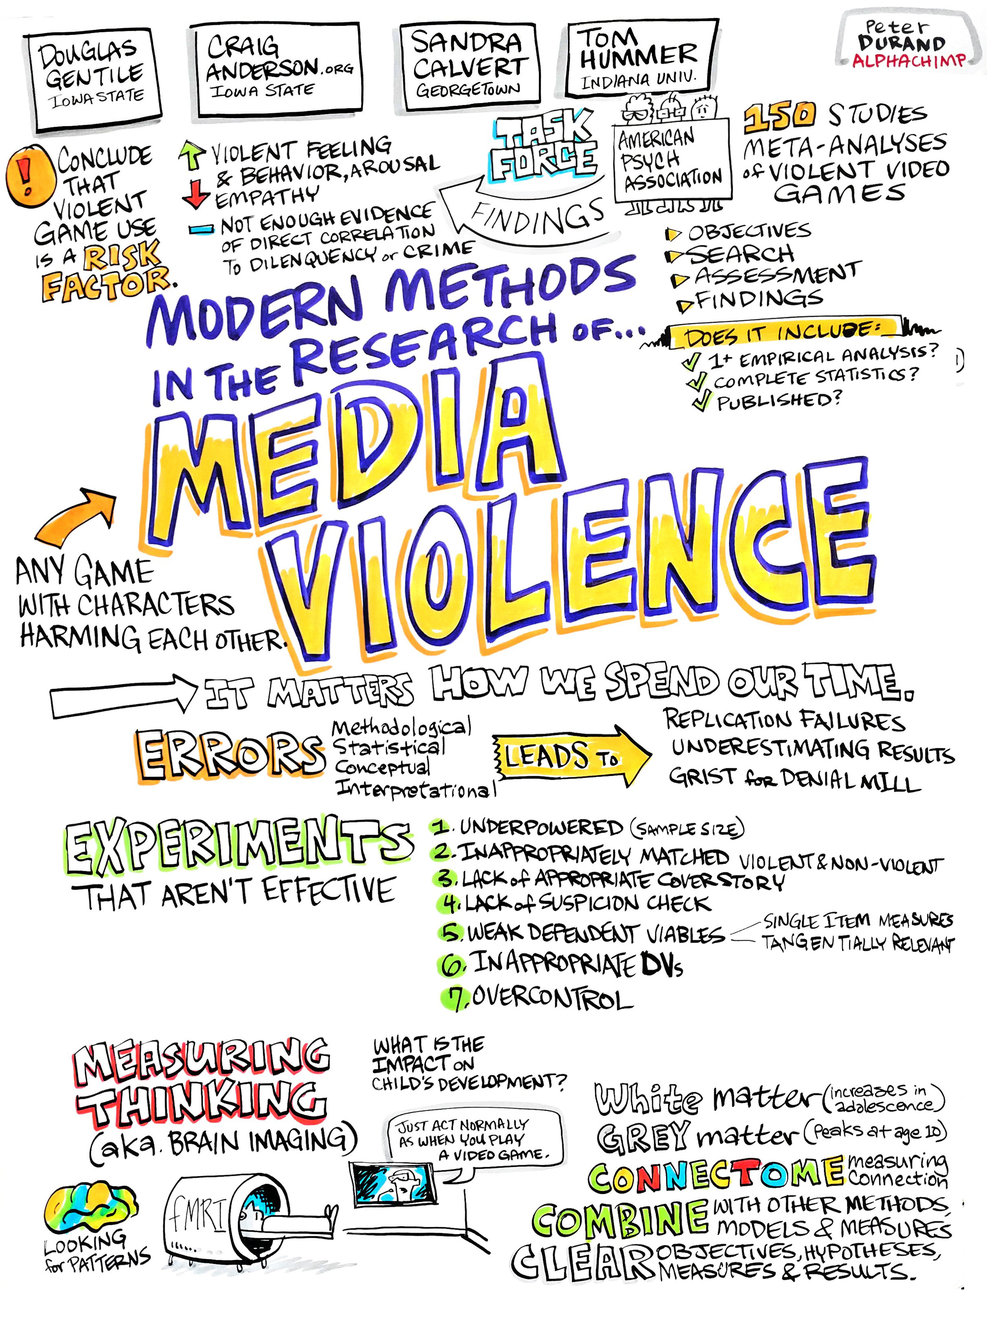 Modern Methods in the Study of Media Violence